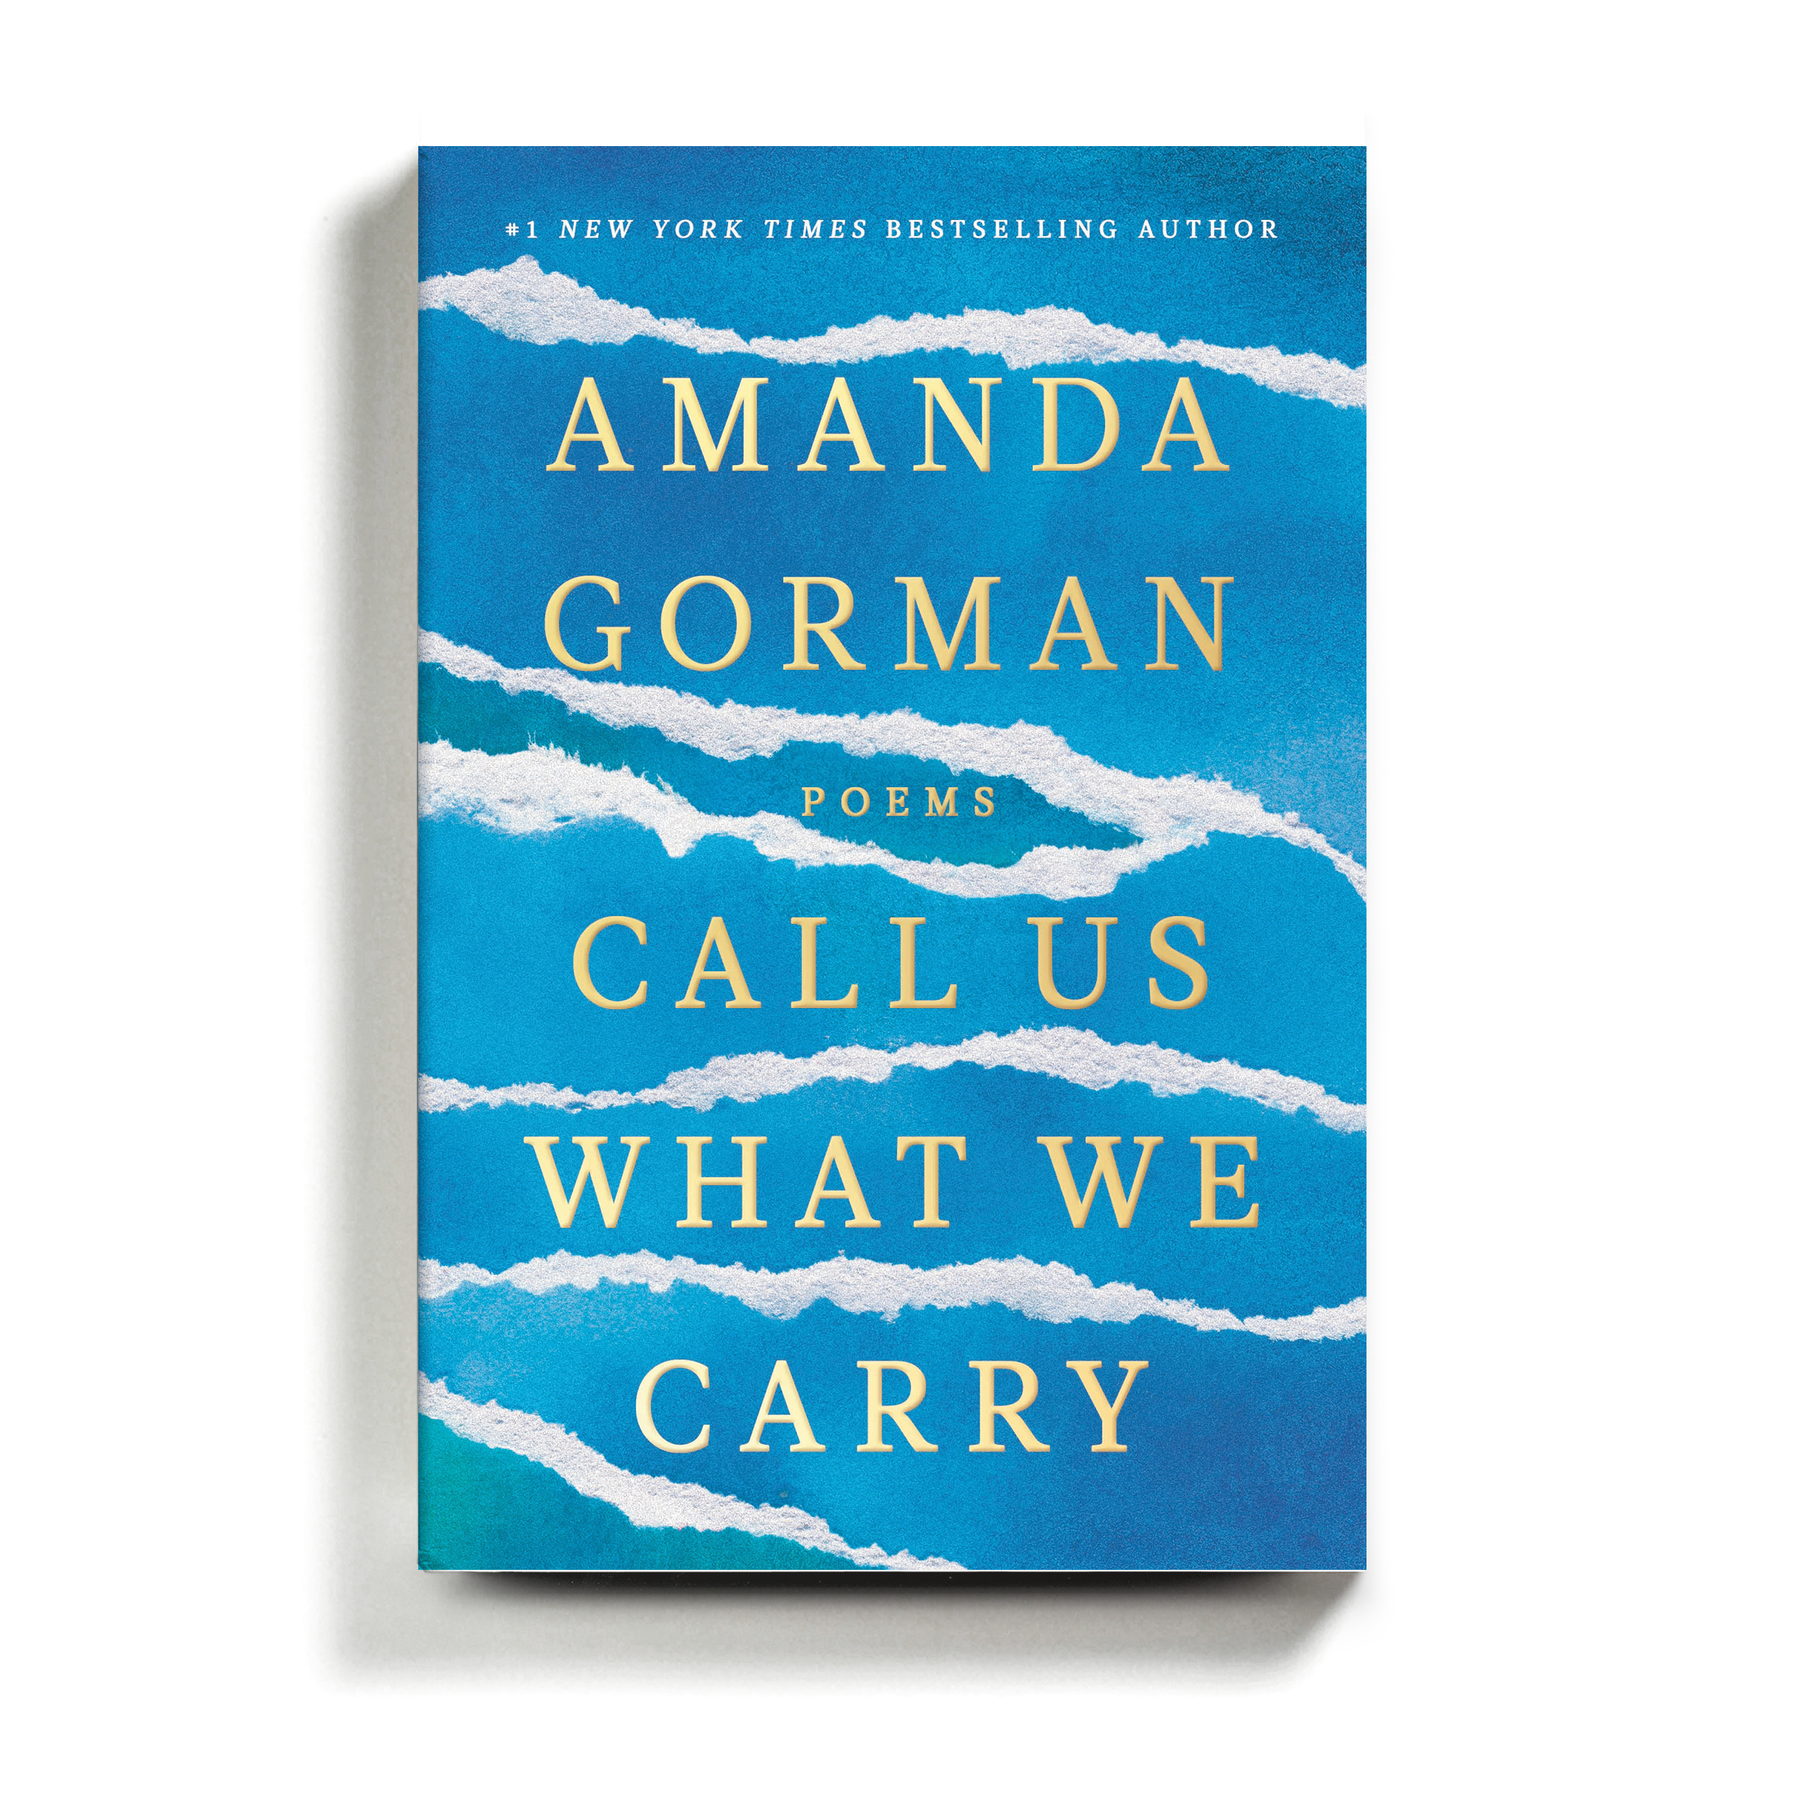 Review: Amanda Gorman's 'Call Us What We Carry' is a subtly Black Catholic masterpiece